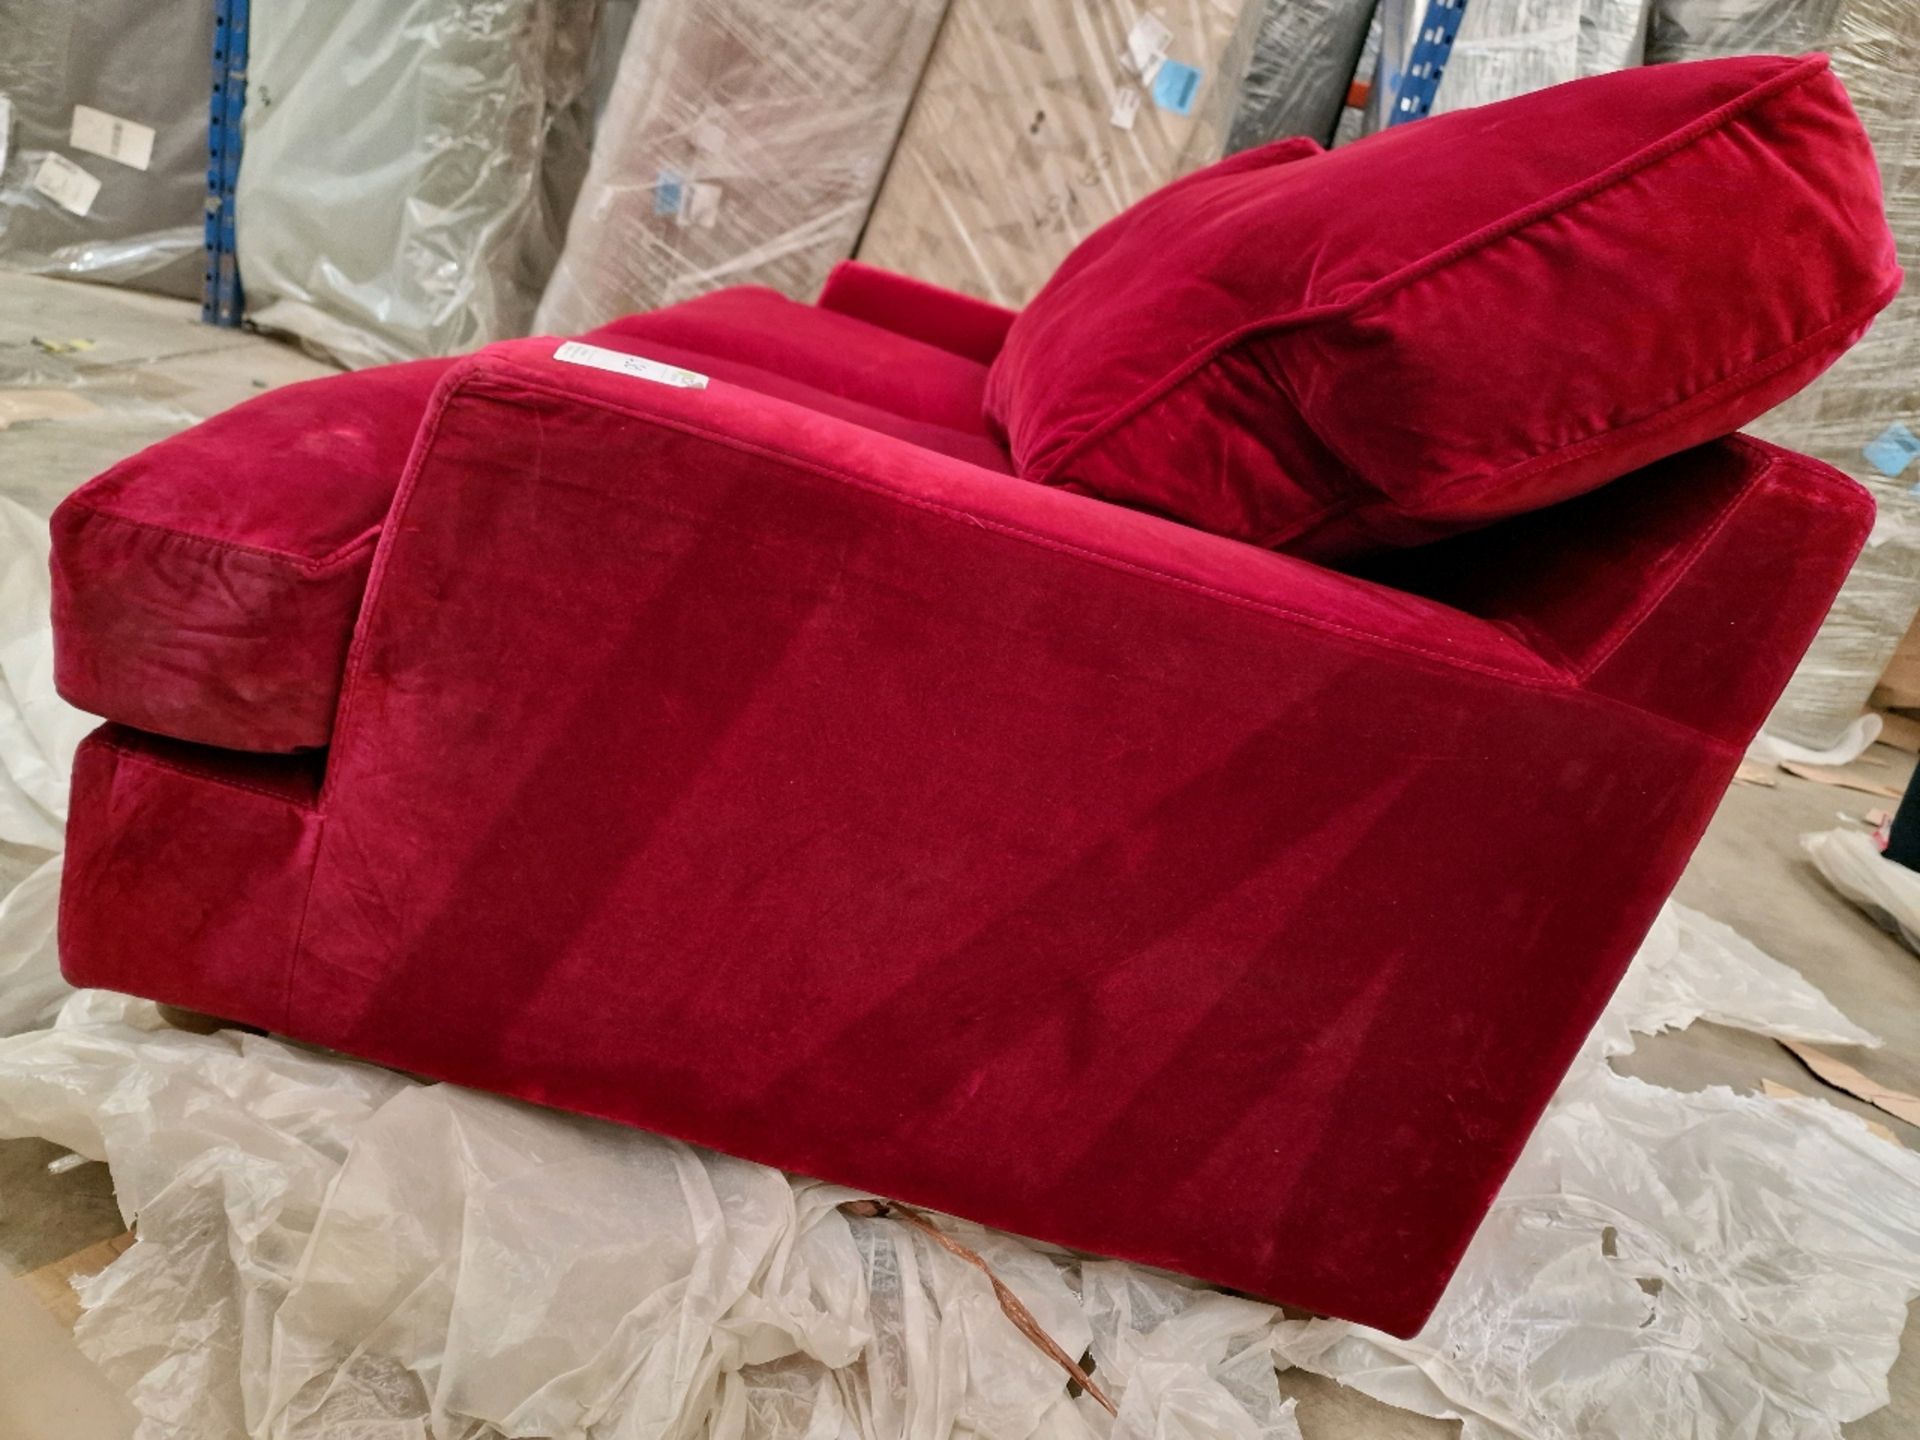 Crushed velvet red 4 seater sofa bed - Image 2 of 5